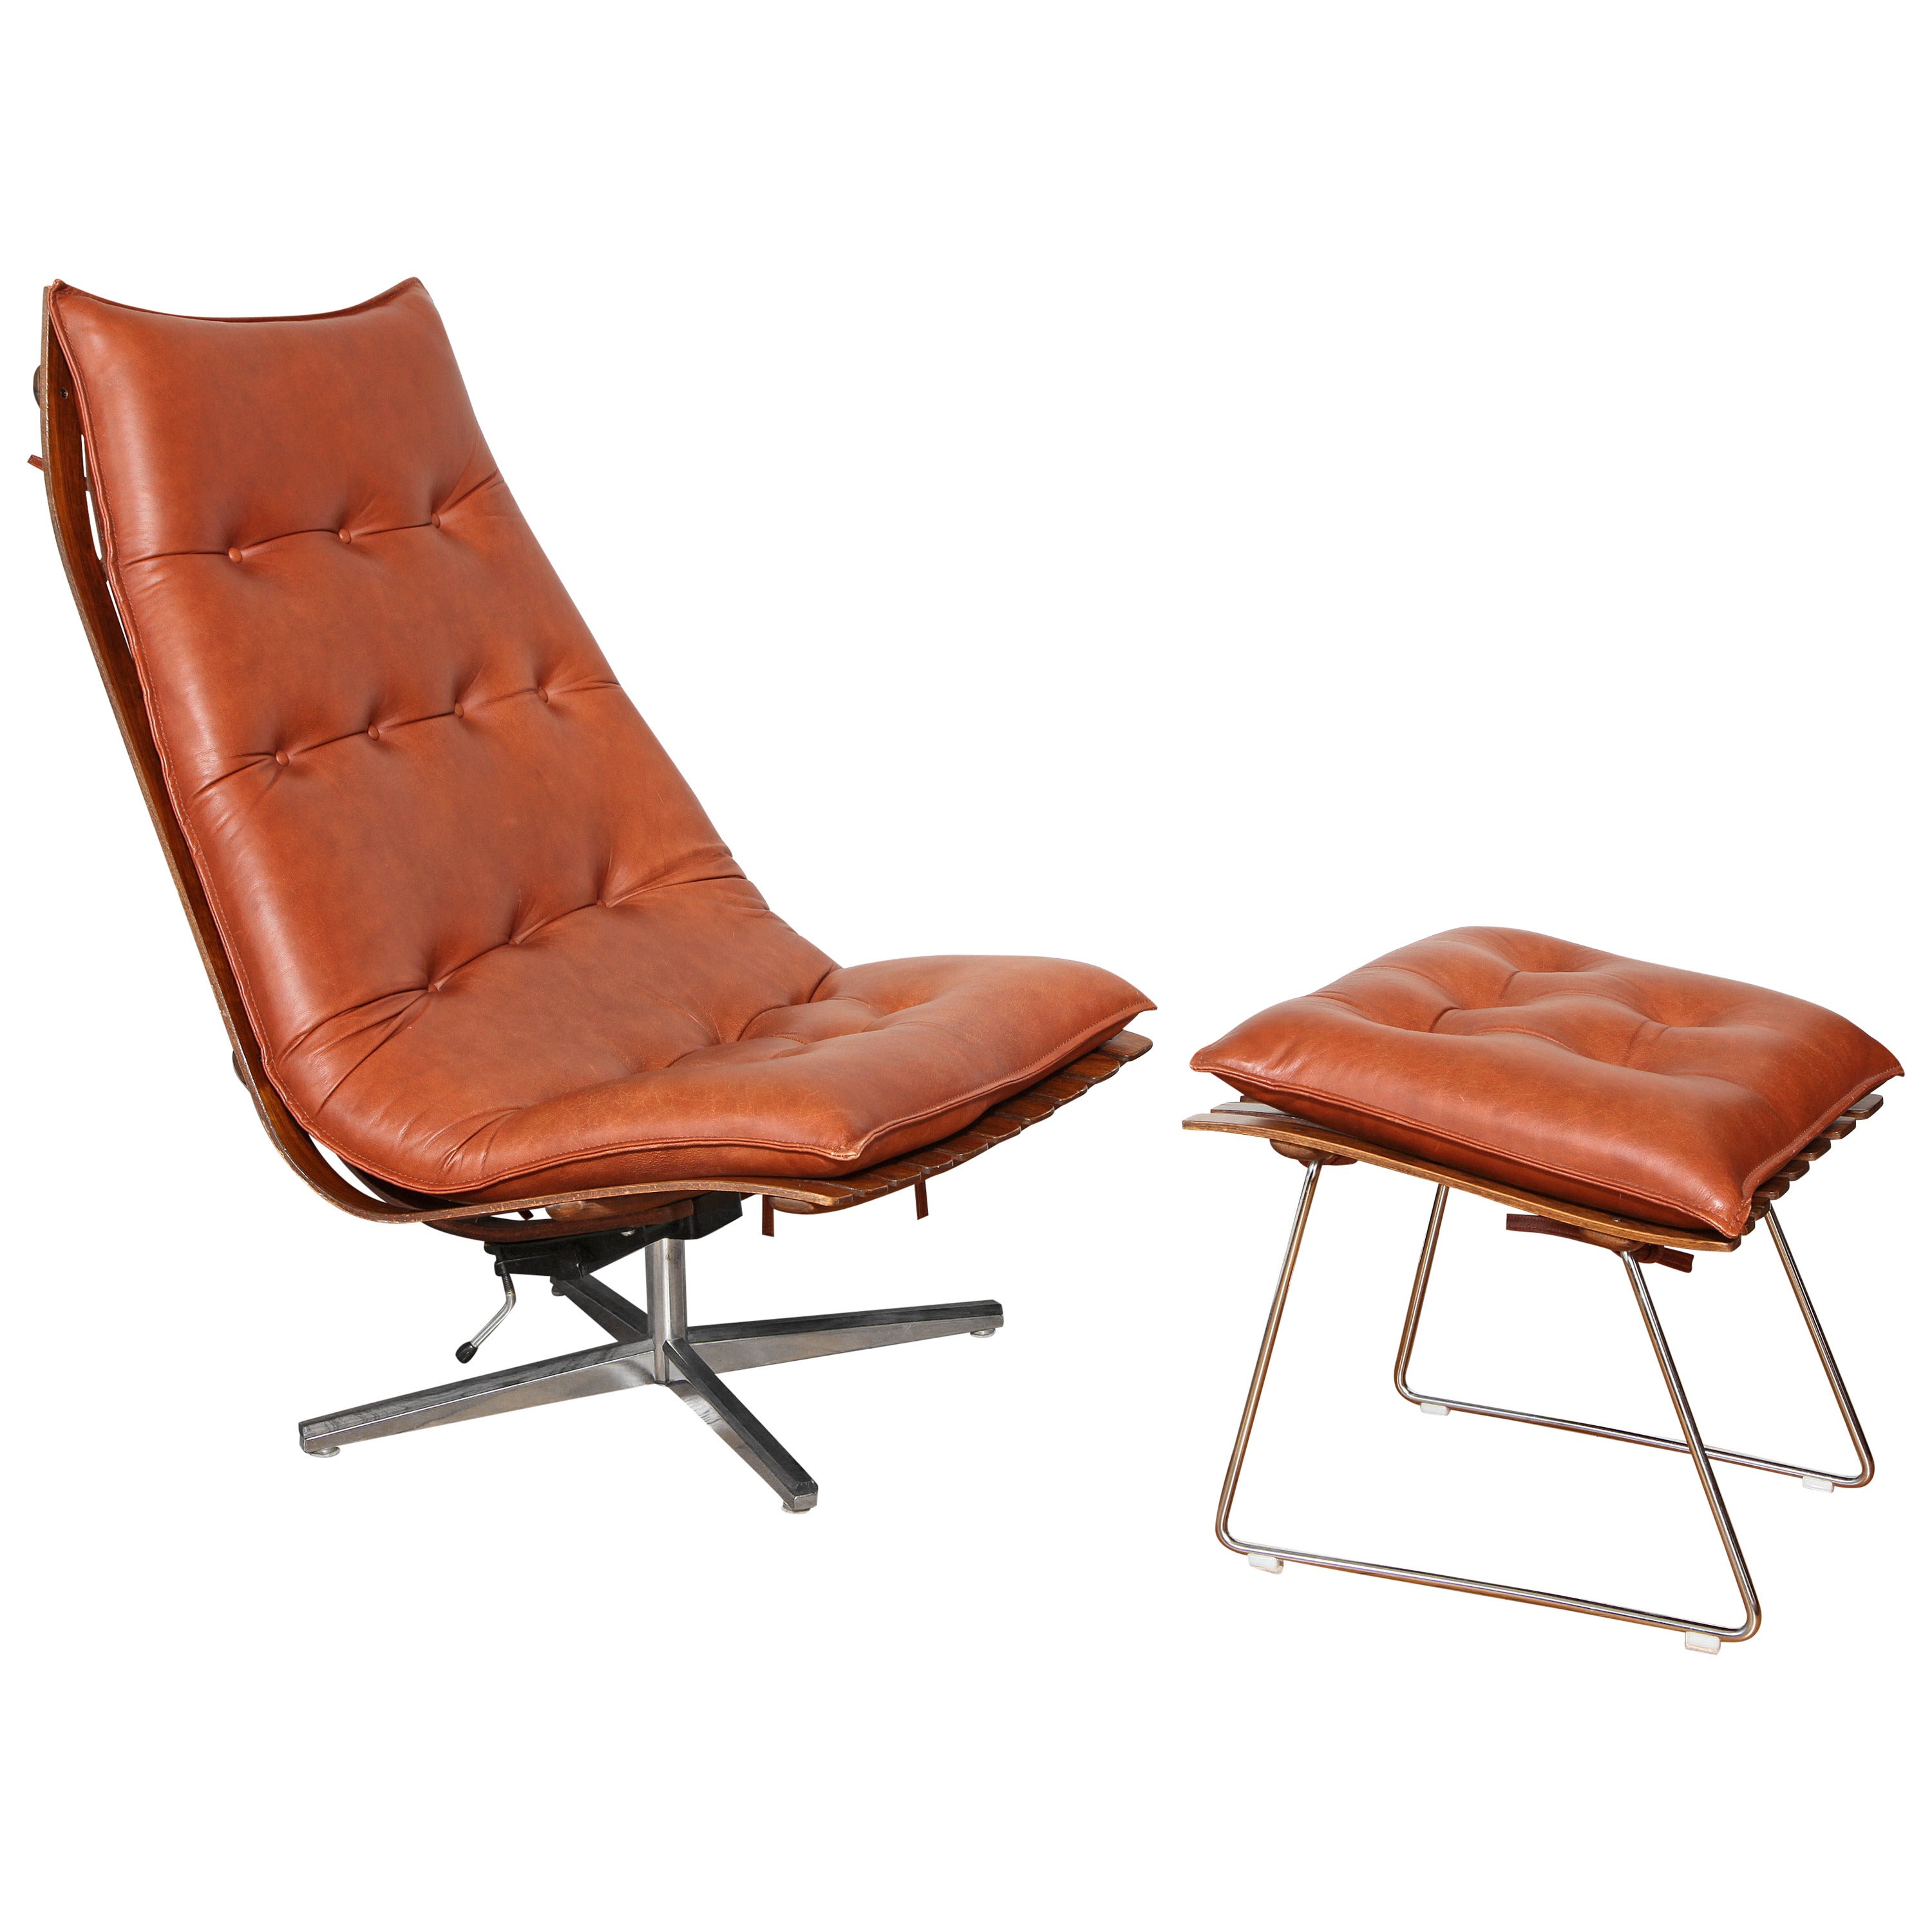 Hans Brattrud Rosewood 'Scandia' Swivel Lounge Chair and Ottoman, Hove Mobler